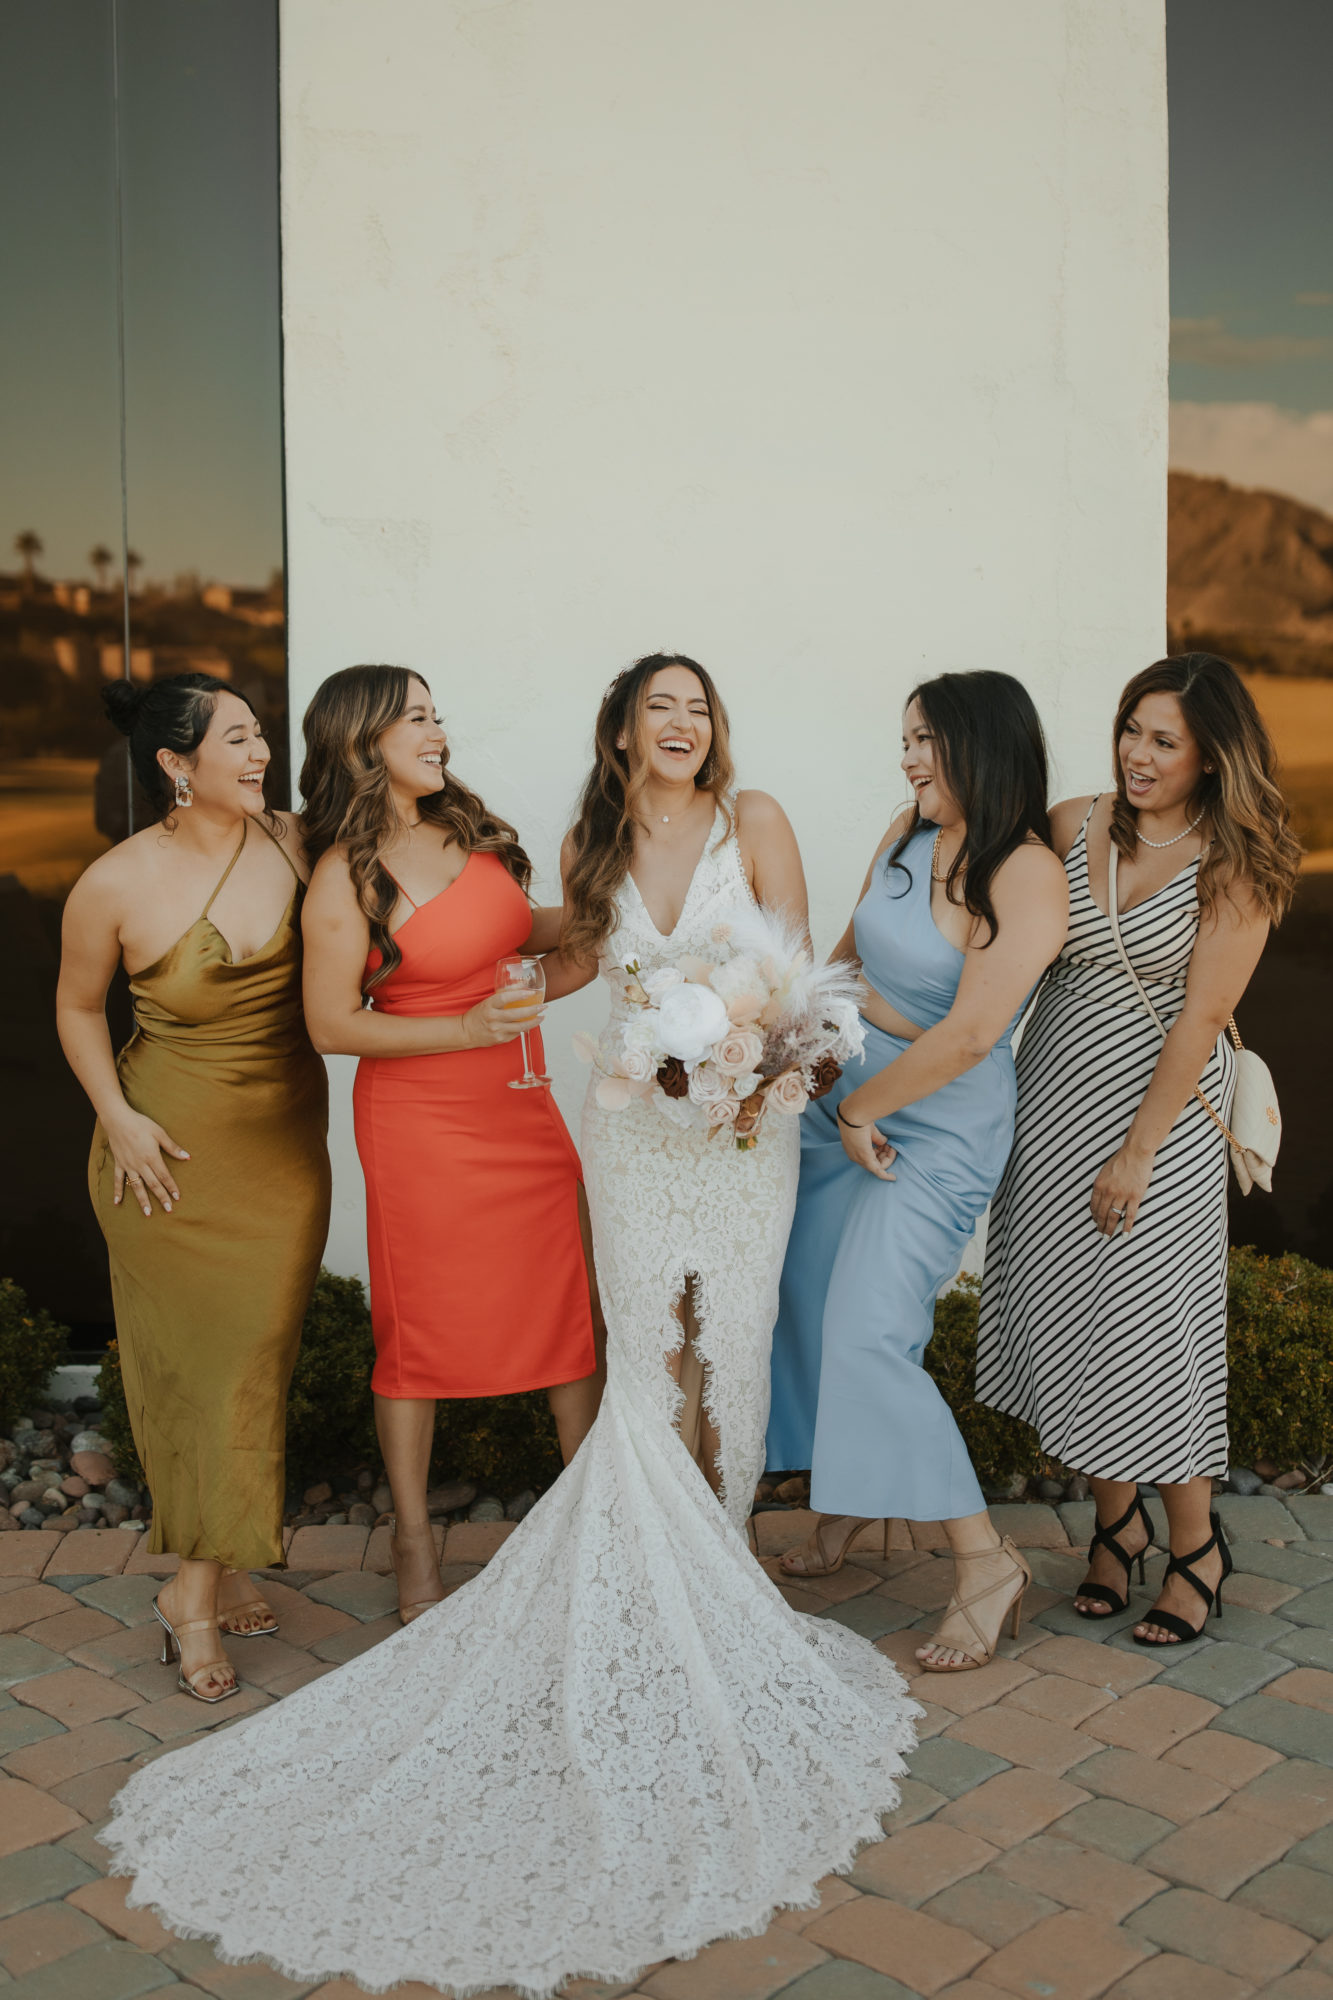 bride laughing with her girl friends after the wedding ceremony